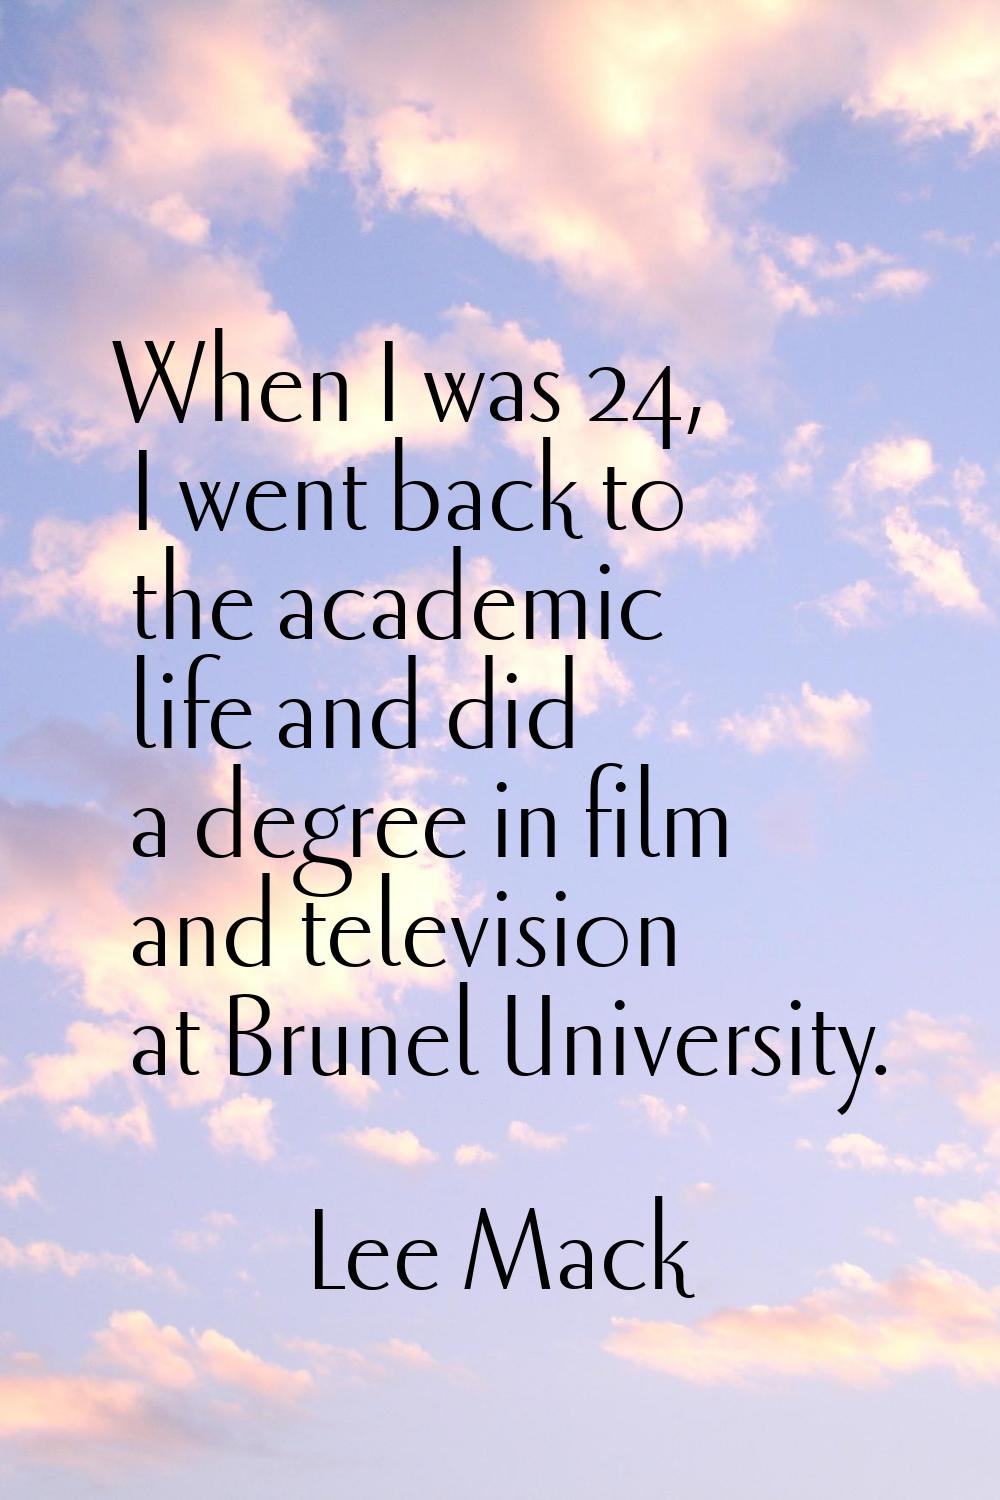 When I was 24, I went back to the academic life and did a degree in film and television at Brunel U